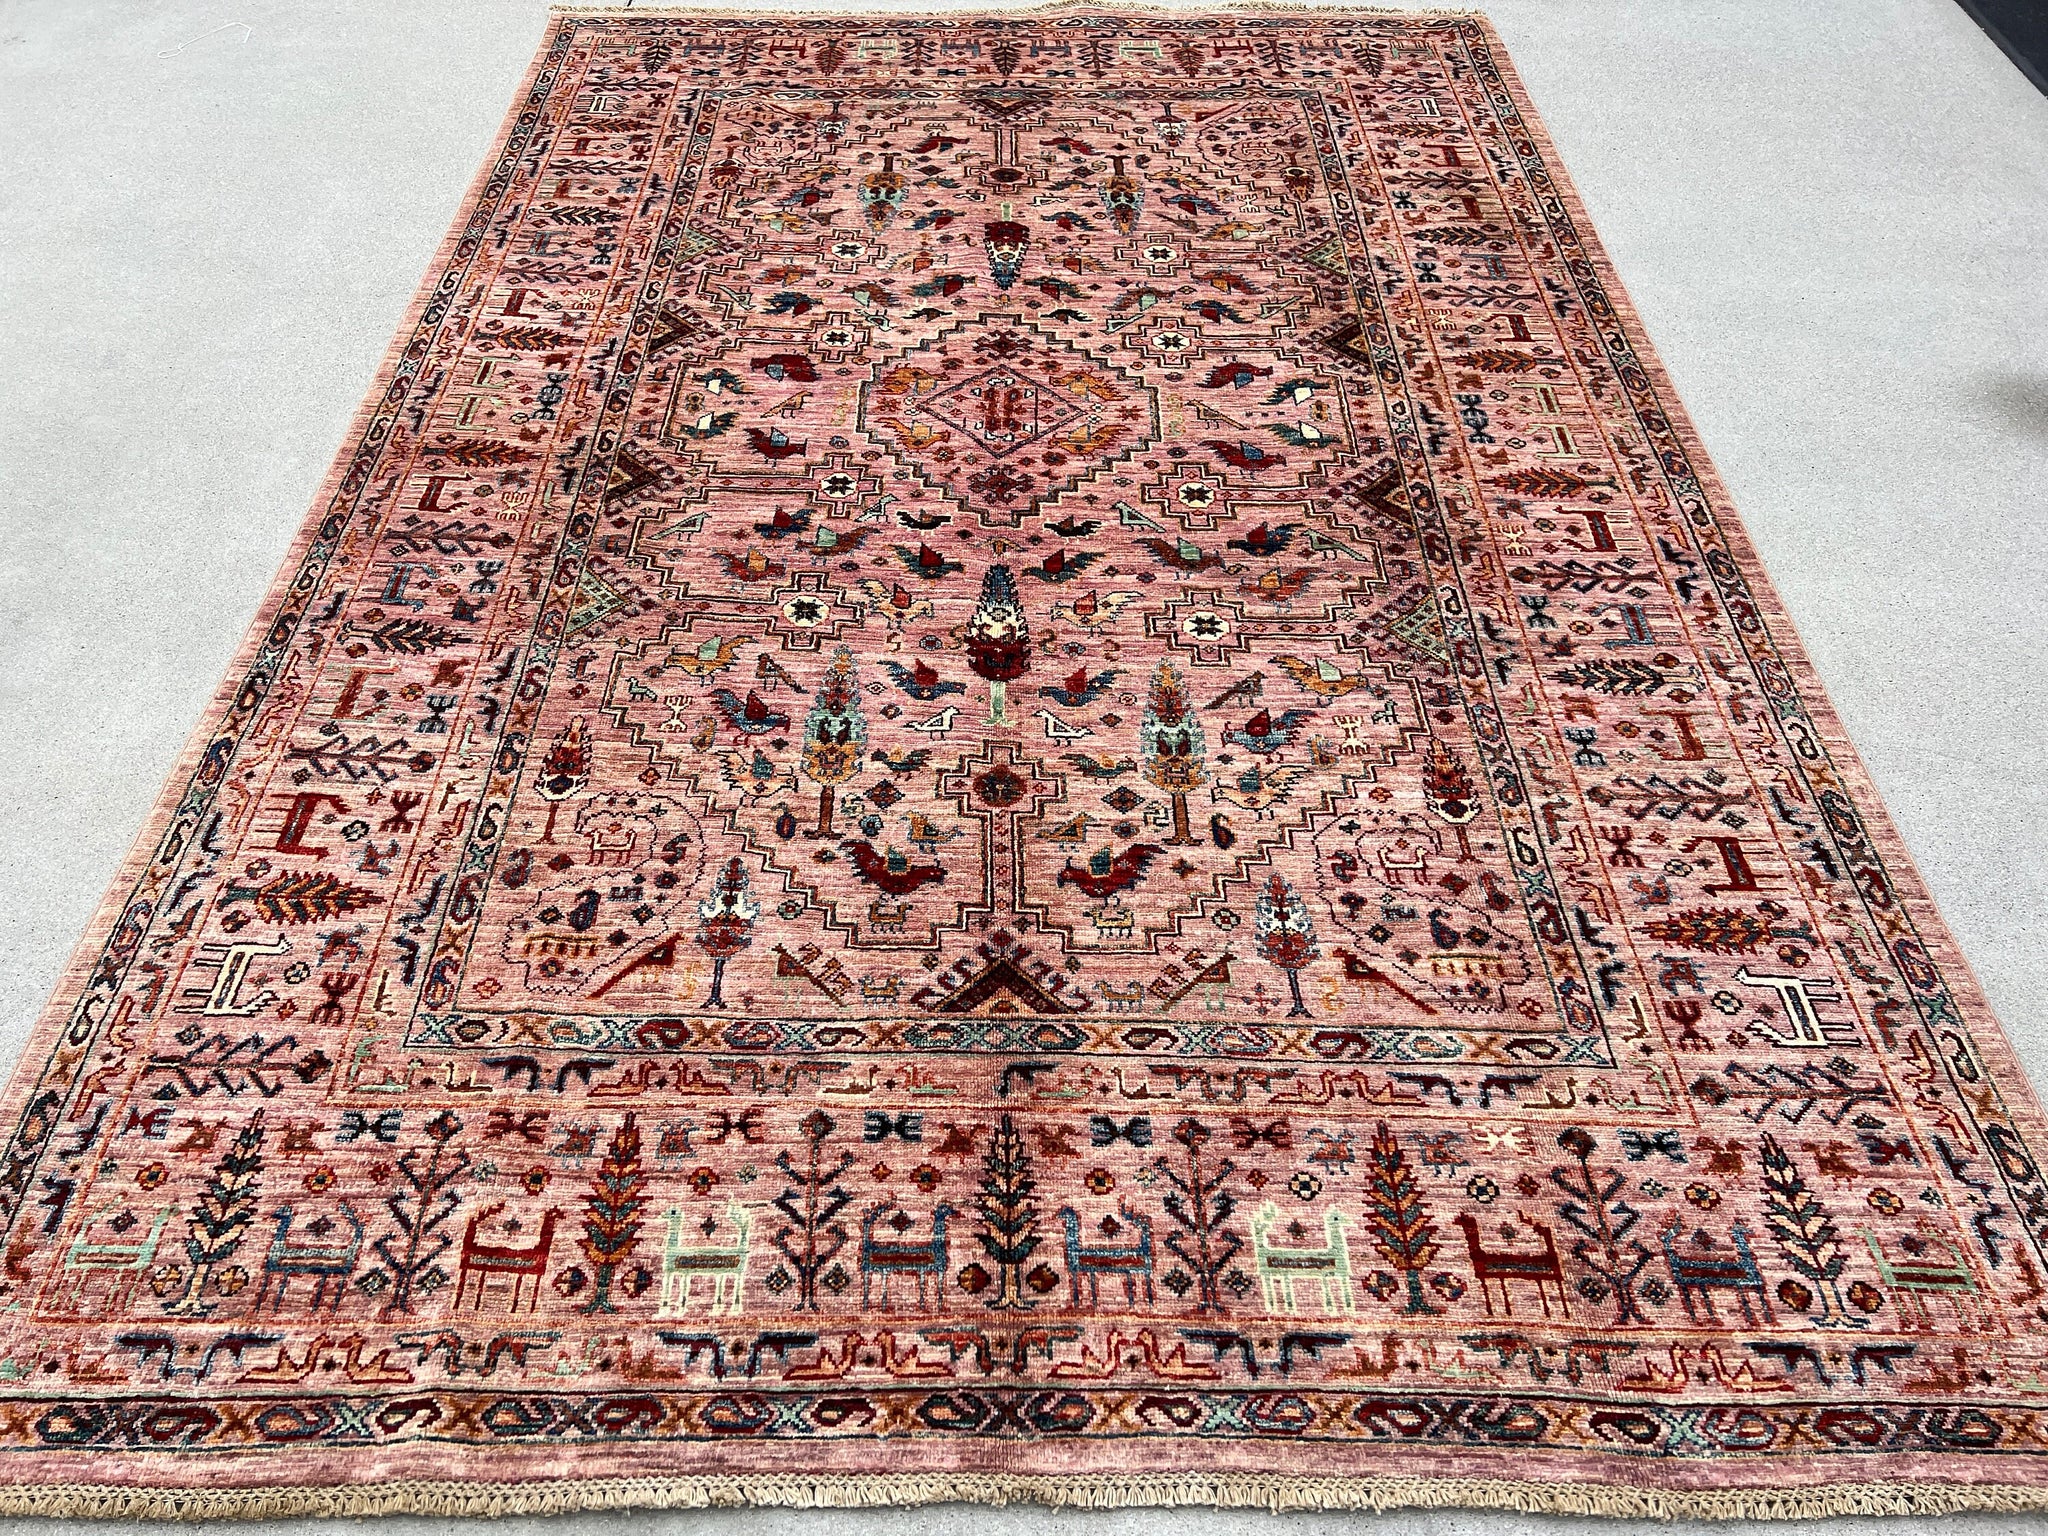 6x9 Handmade Afghan Rug | Earth Tone Brown Antique Brass Red Teal Blue Orange Ivory Mint Green | Hand Knotted Persian Bohemian Wool Oushak